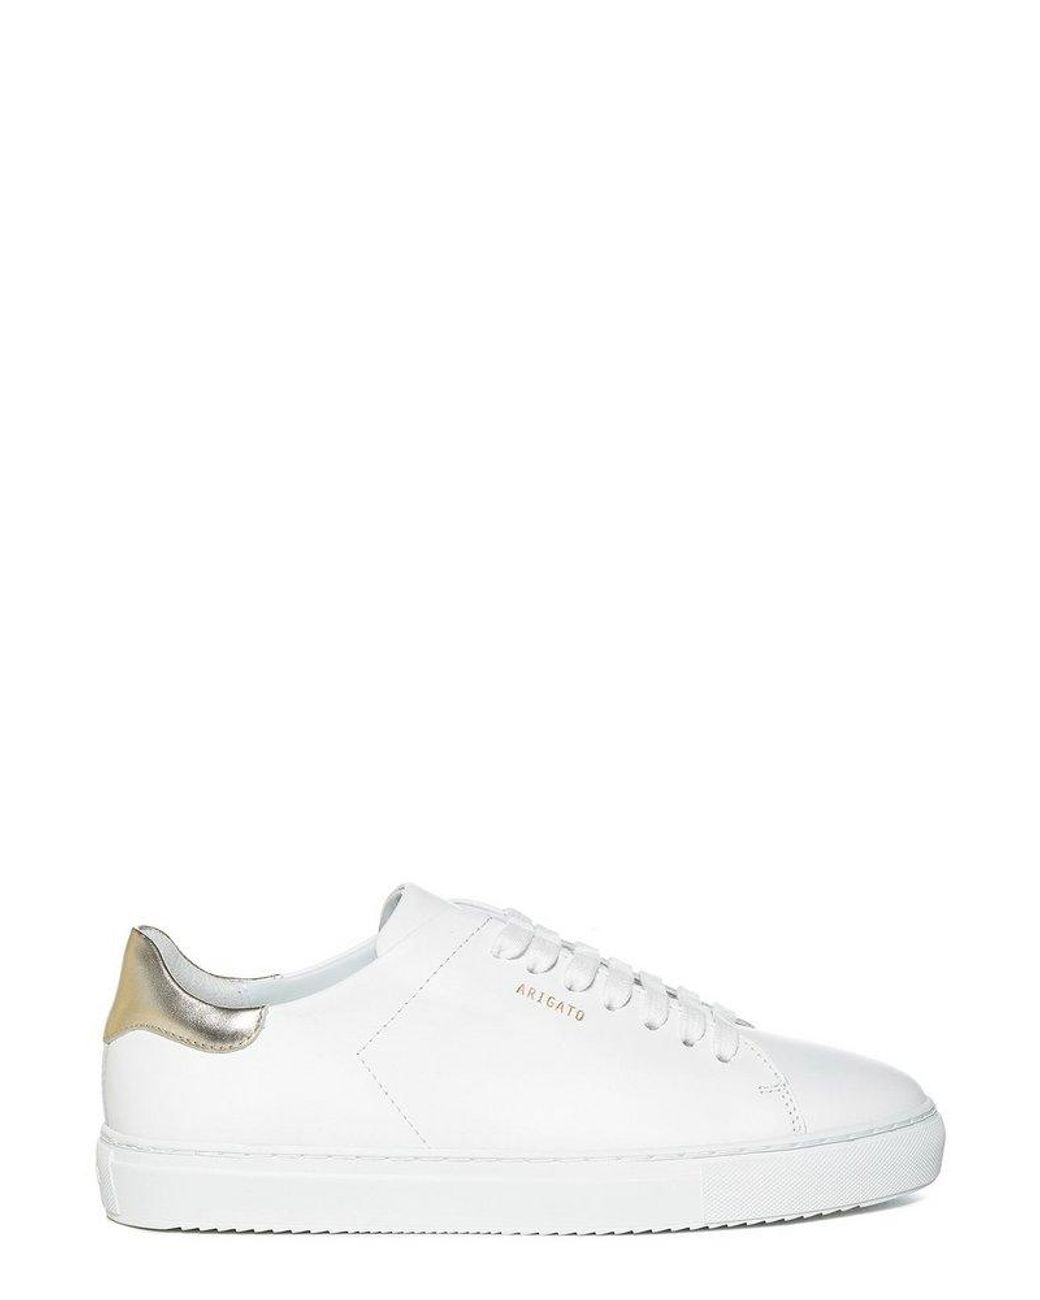 Axel Arigato Logo Detailed Lace-up Sneakers in White | Lyst